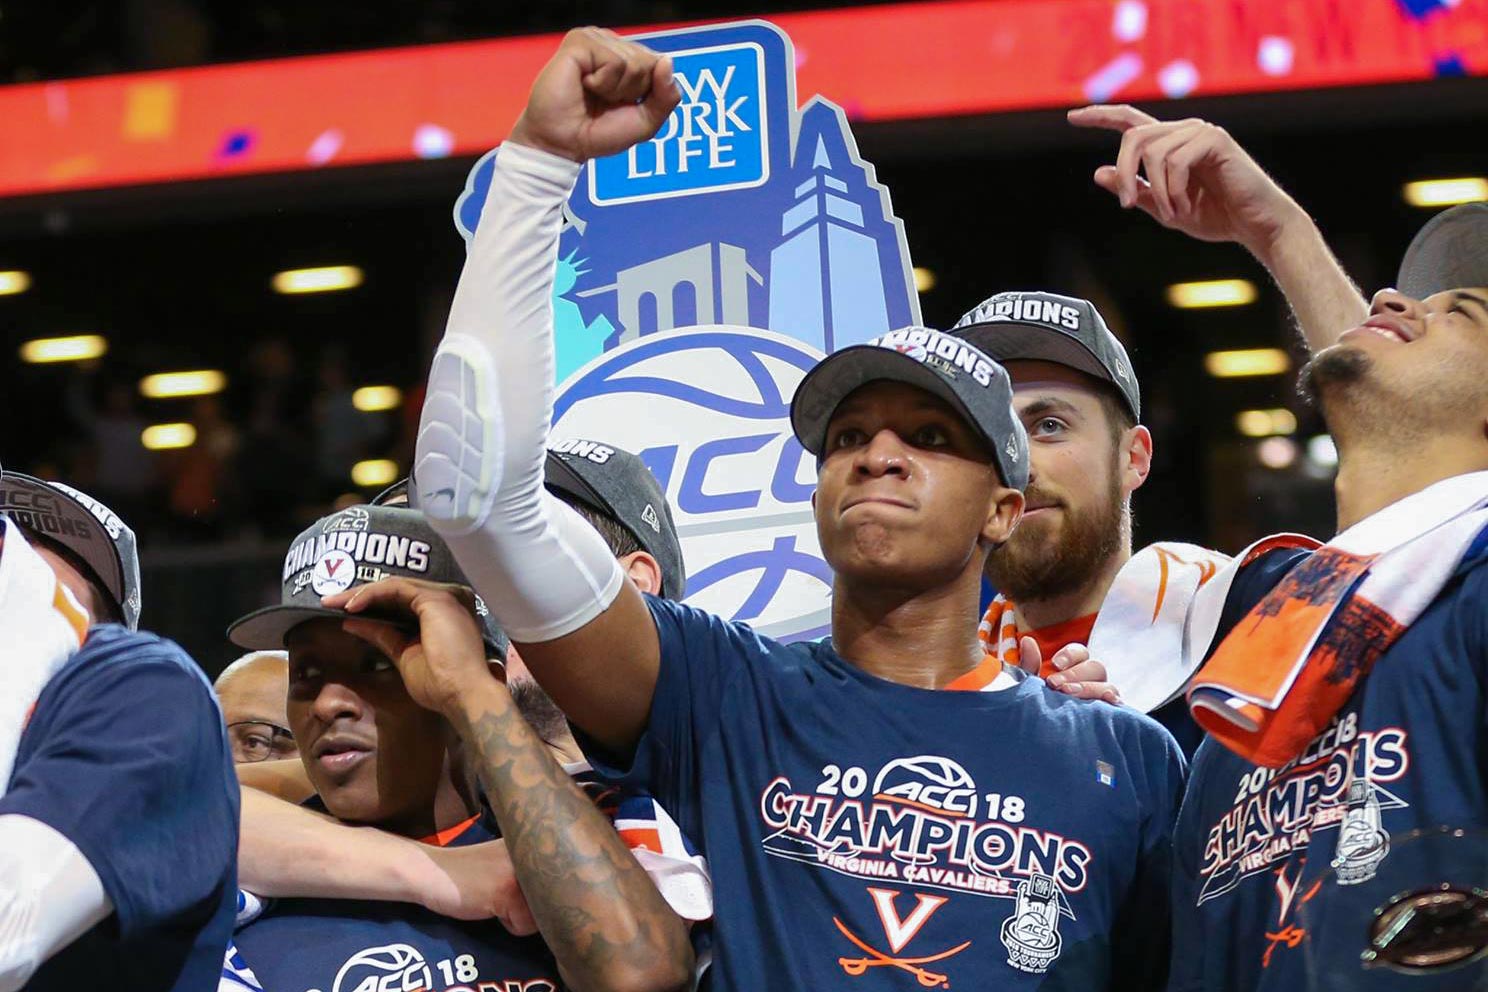 Basketball team celebrates on stage after winning ACC championship